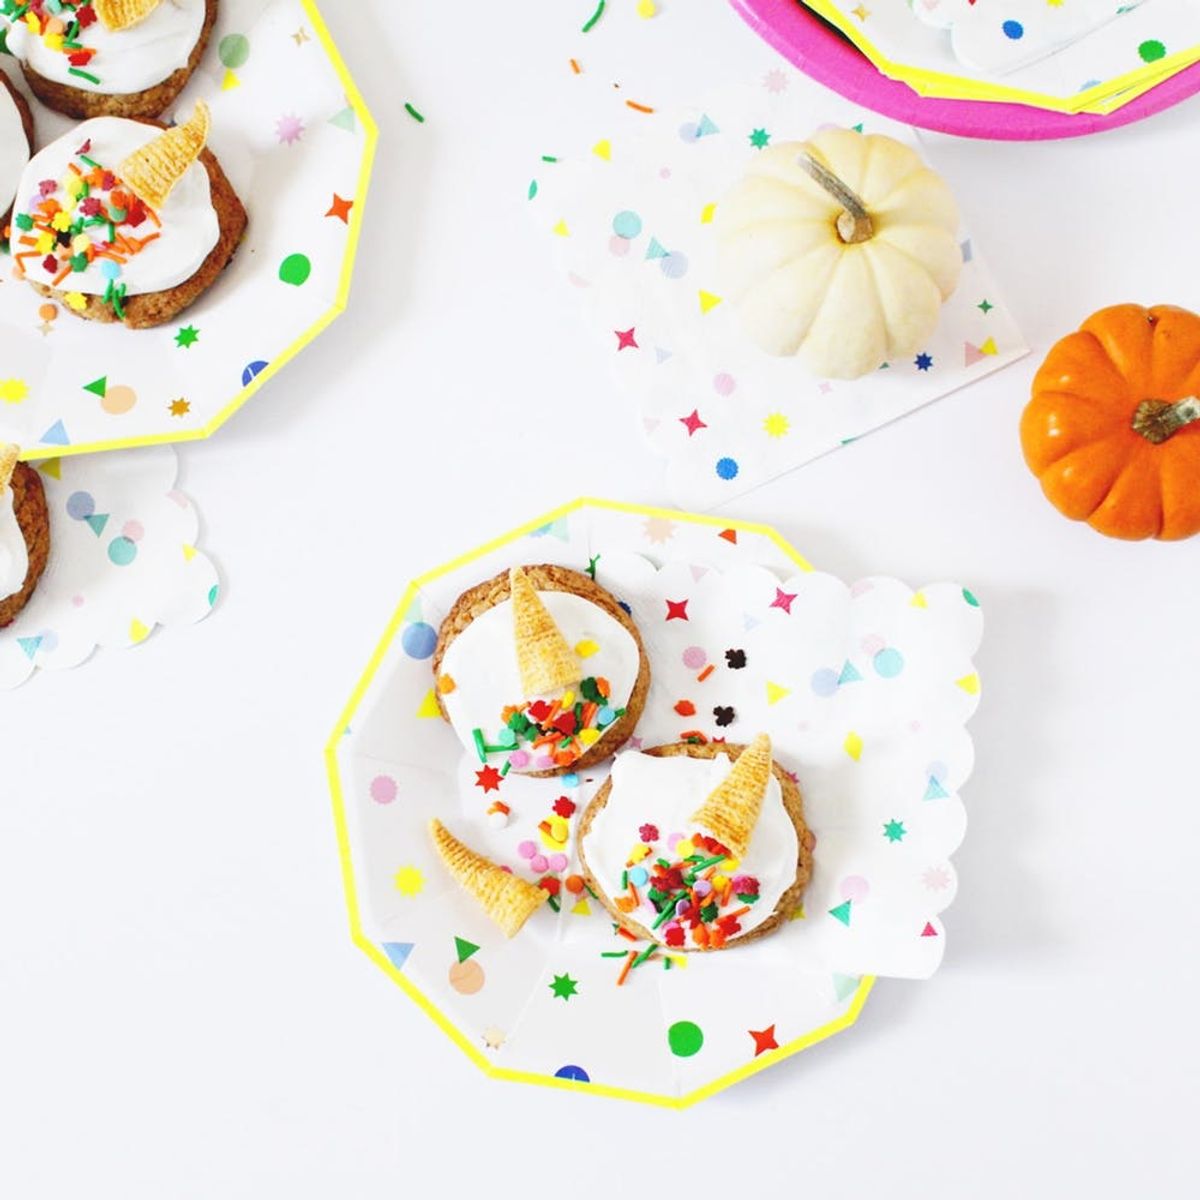 Make These Cornucopia Cookies for a Colorful Thanksgiving Dinner